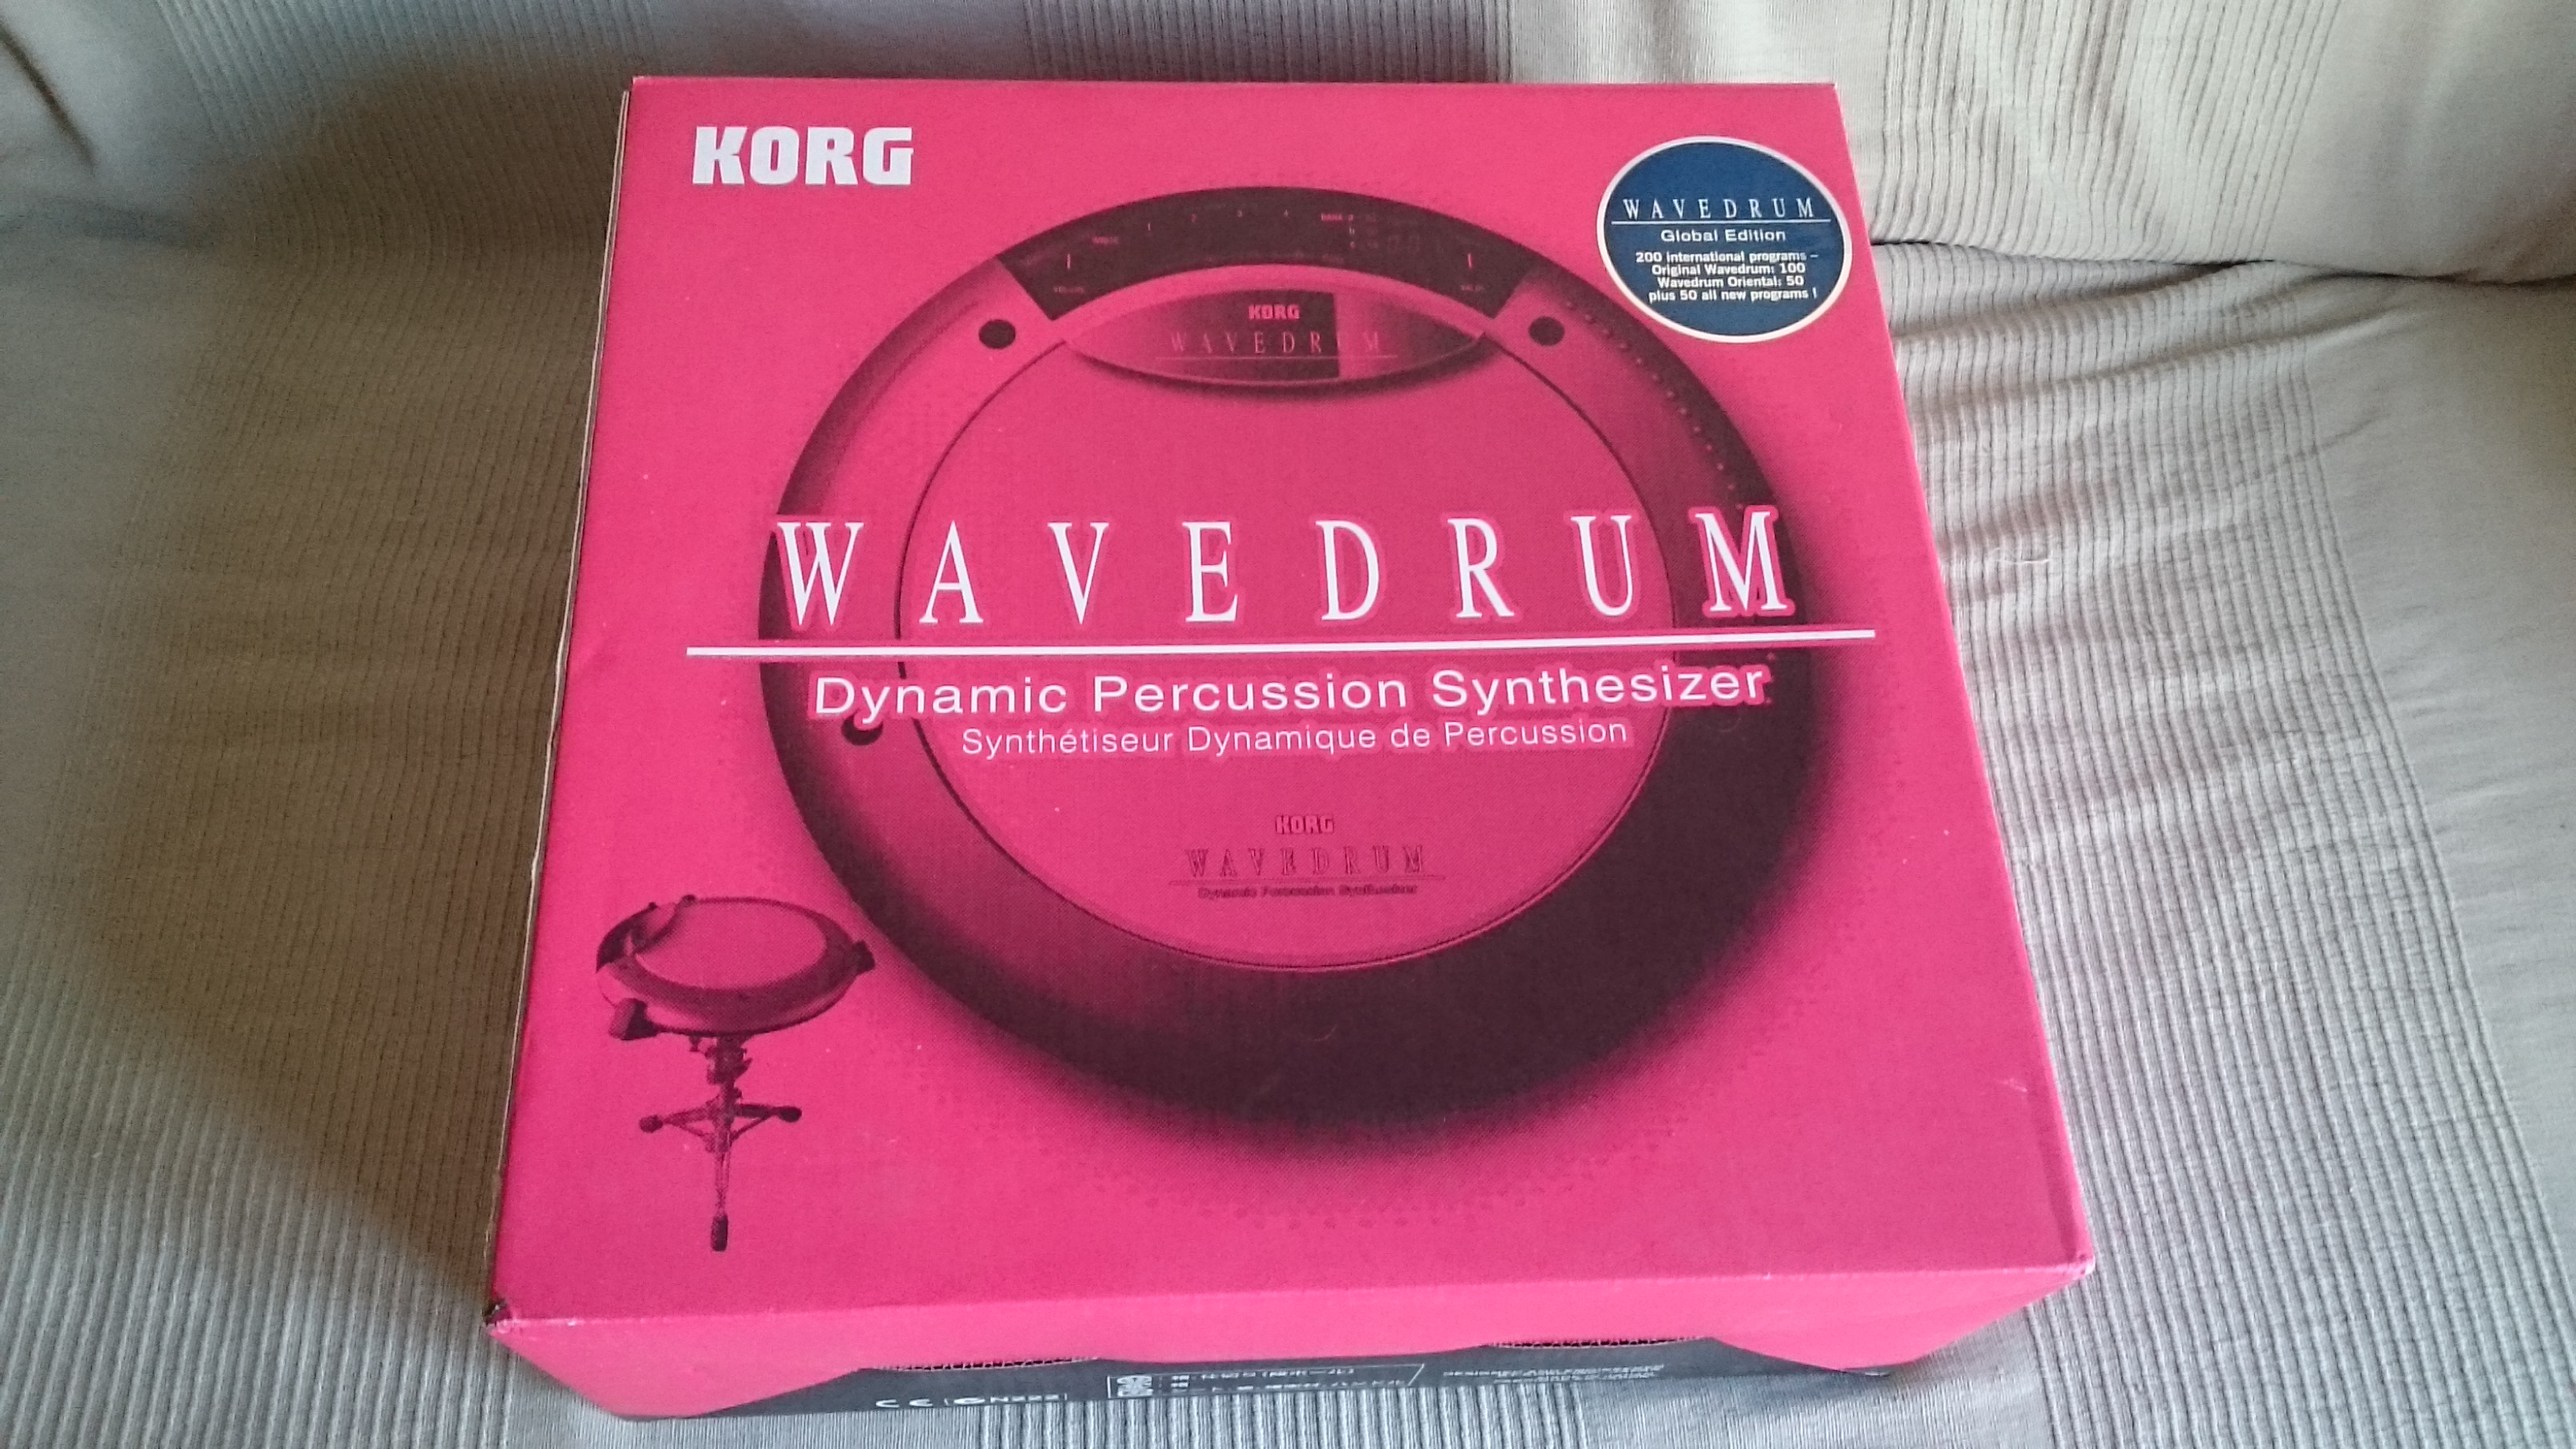 WAVEDRUM Global Edition - Dynamic Percussion Synthesizer